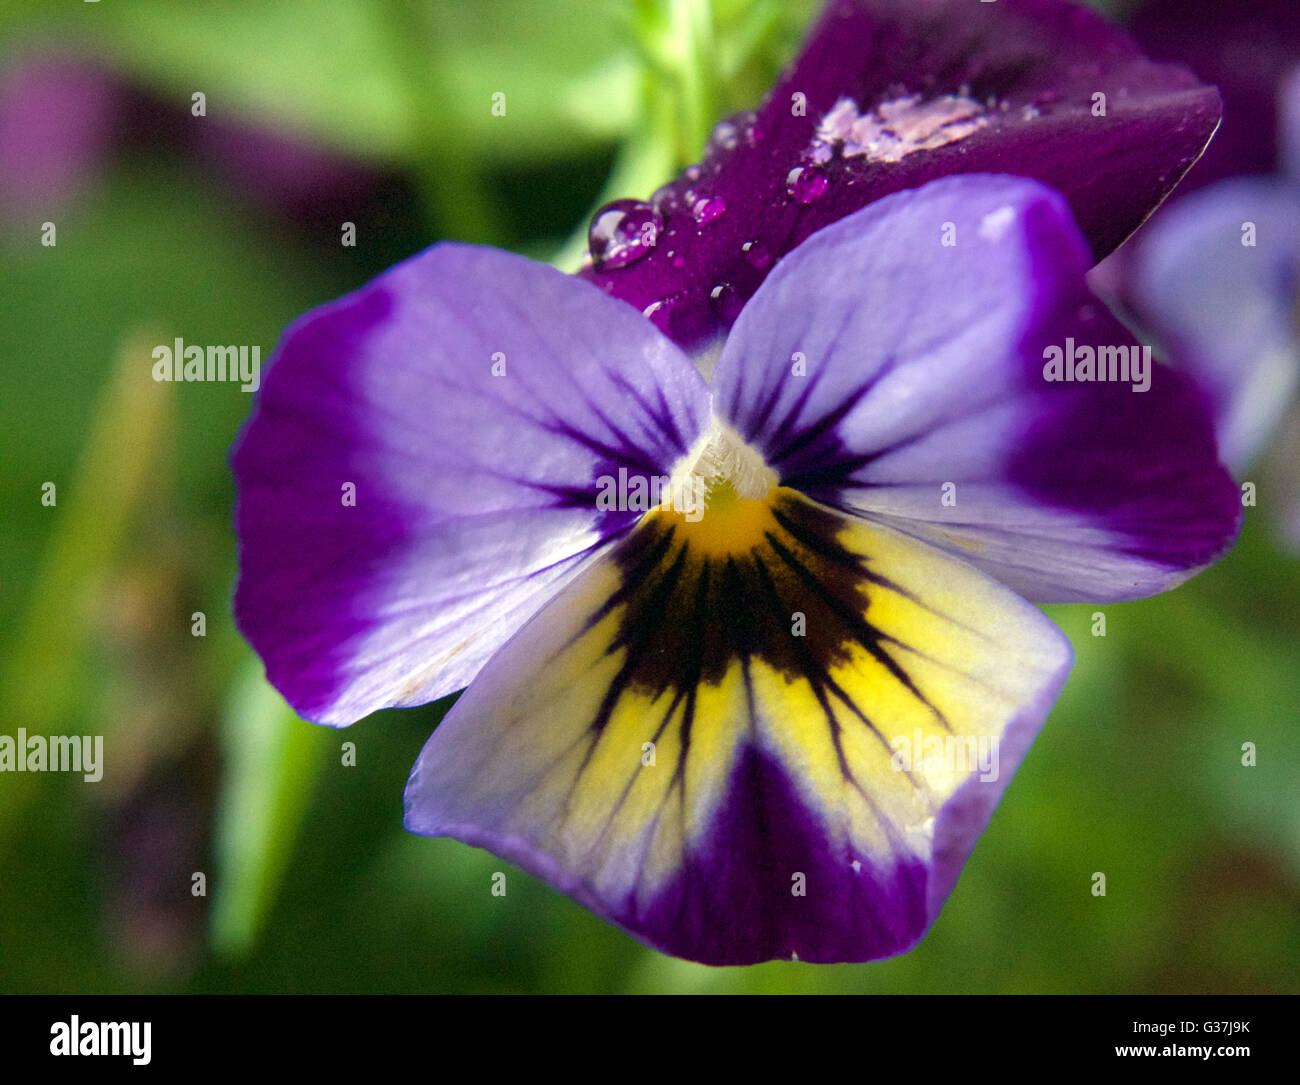 A flower with dew, growing from a windowsill flower pot Stock Photo